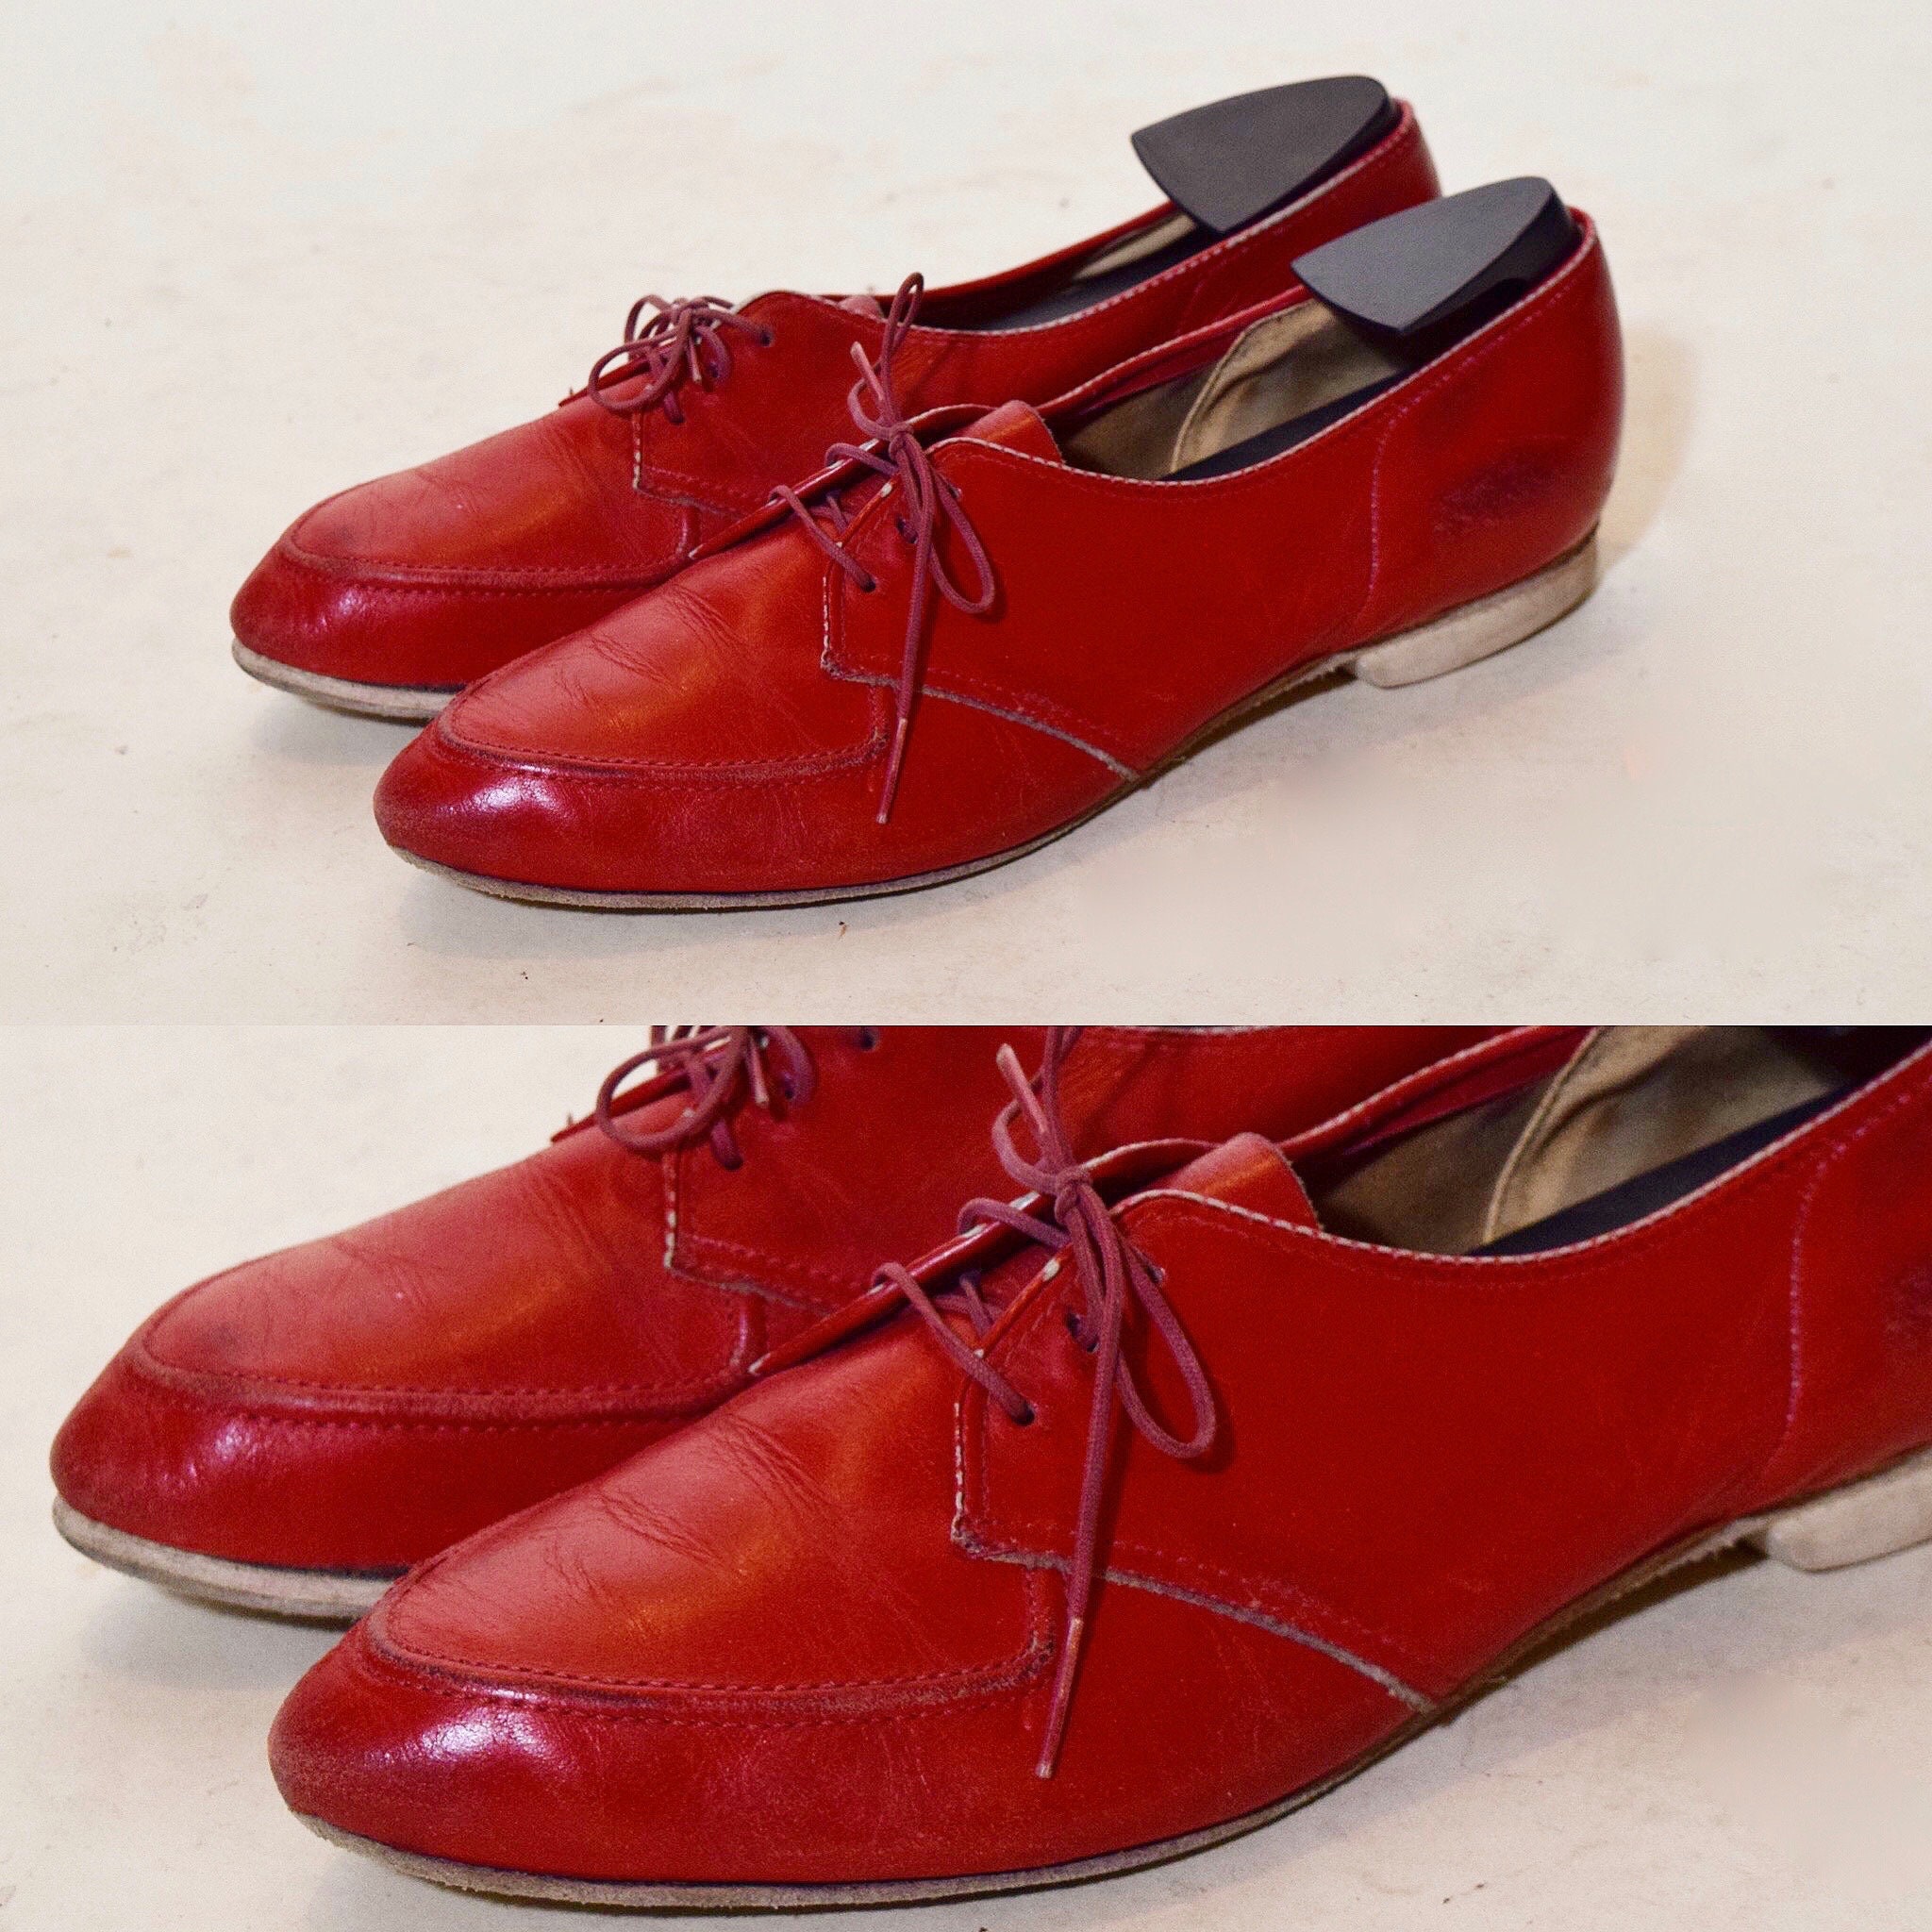 1950s authentic vintage rockabilly style red leather bowling shoes ...